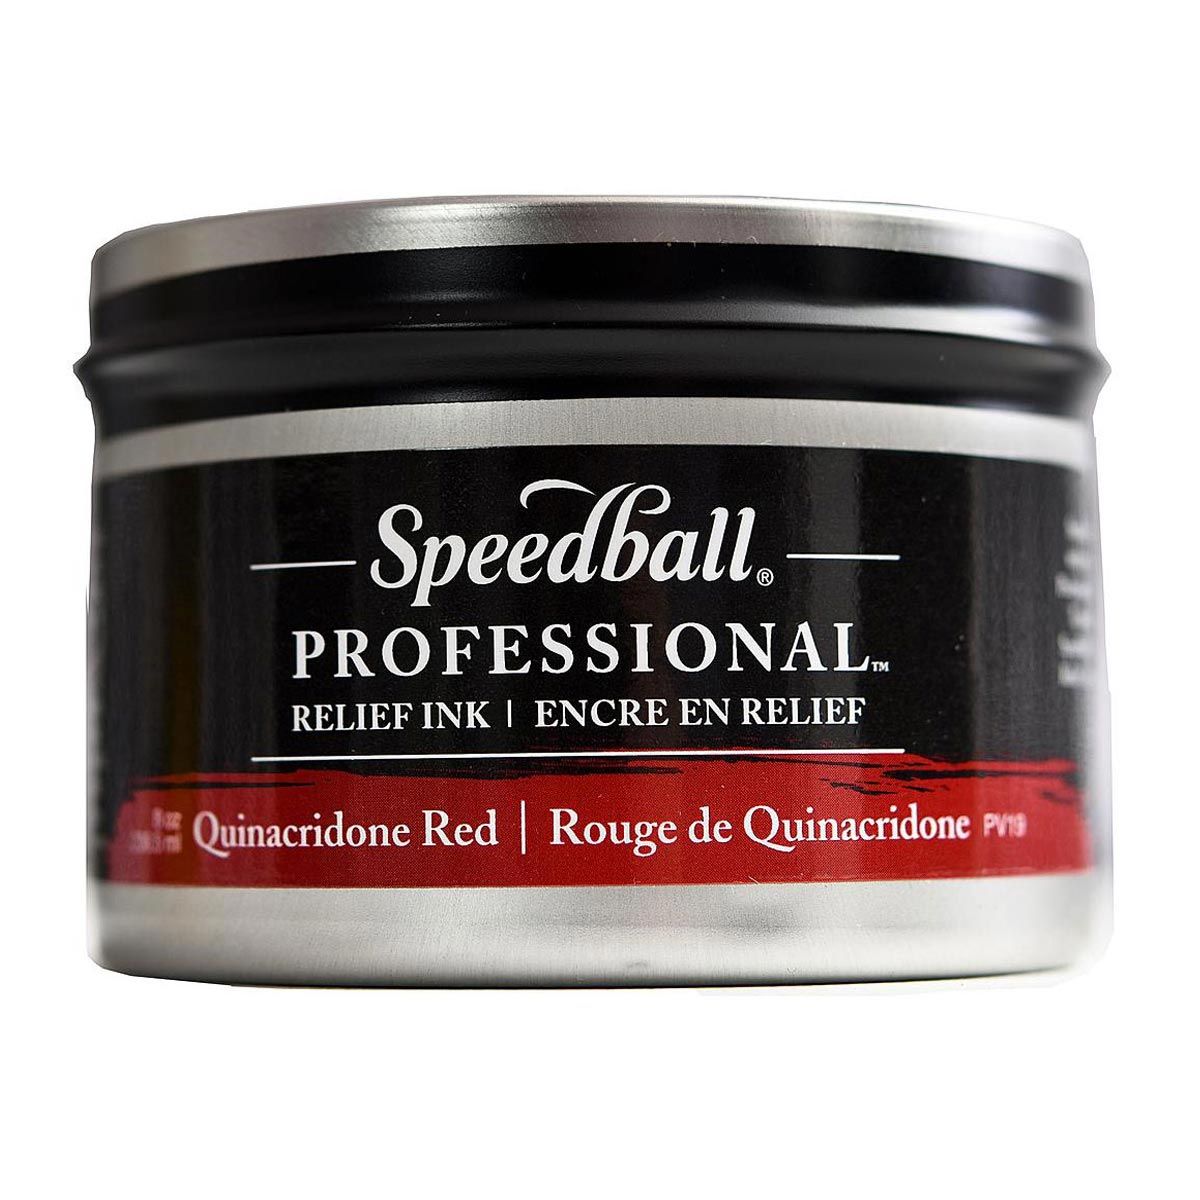 Speedball Professional Relief Ink - Quinacridone Red 8 oz